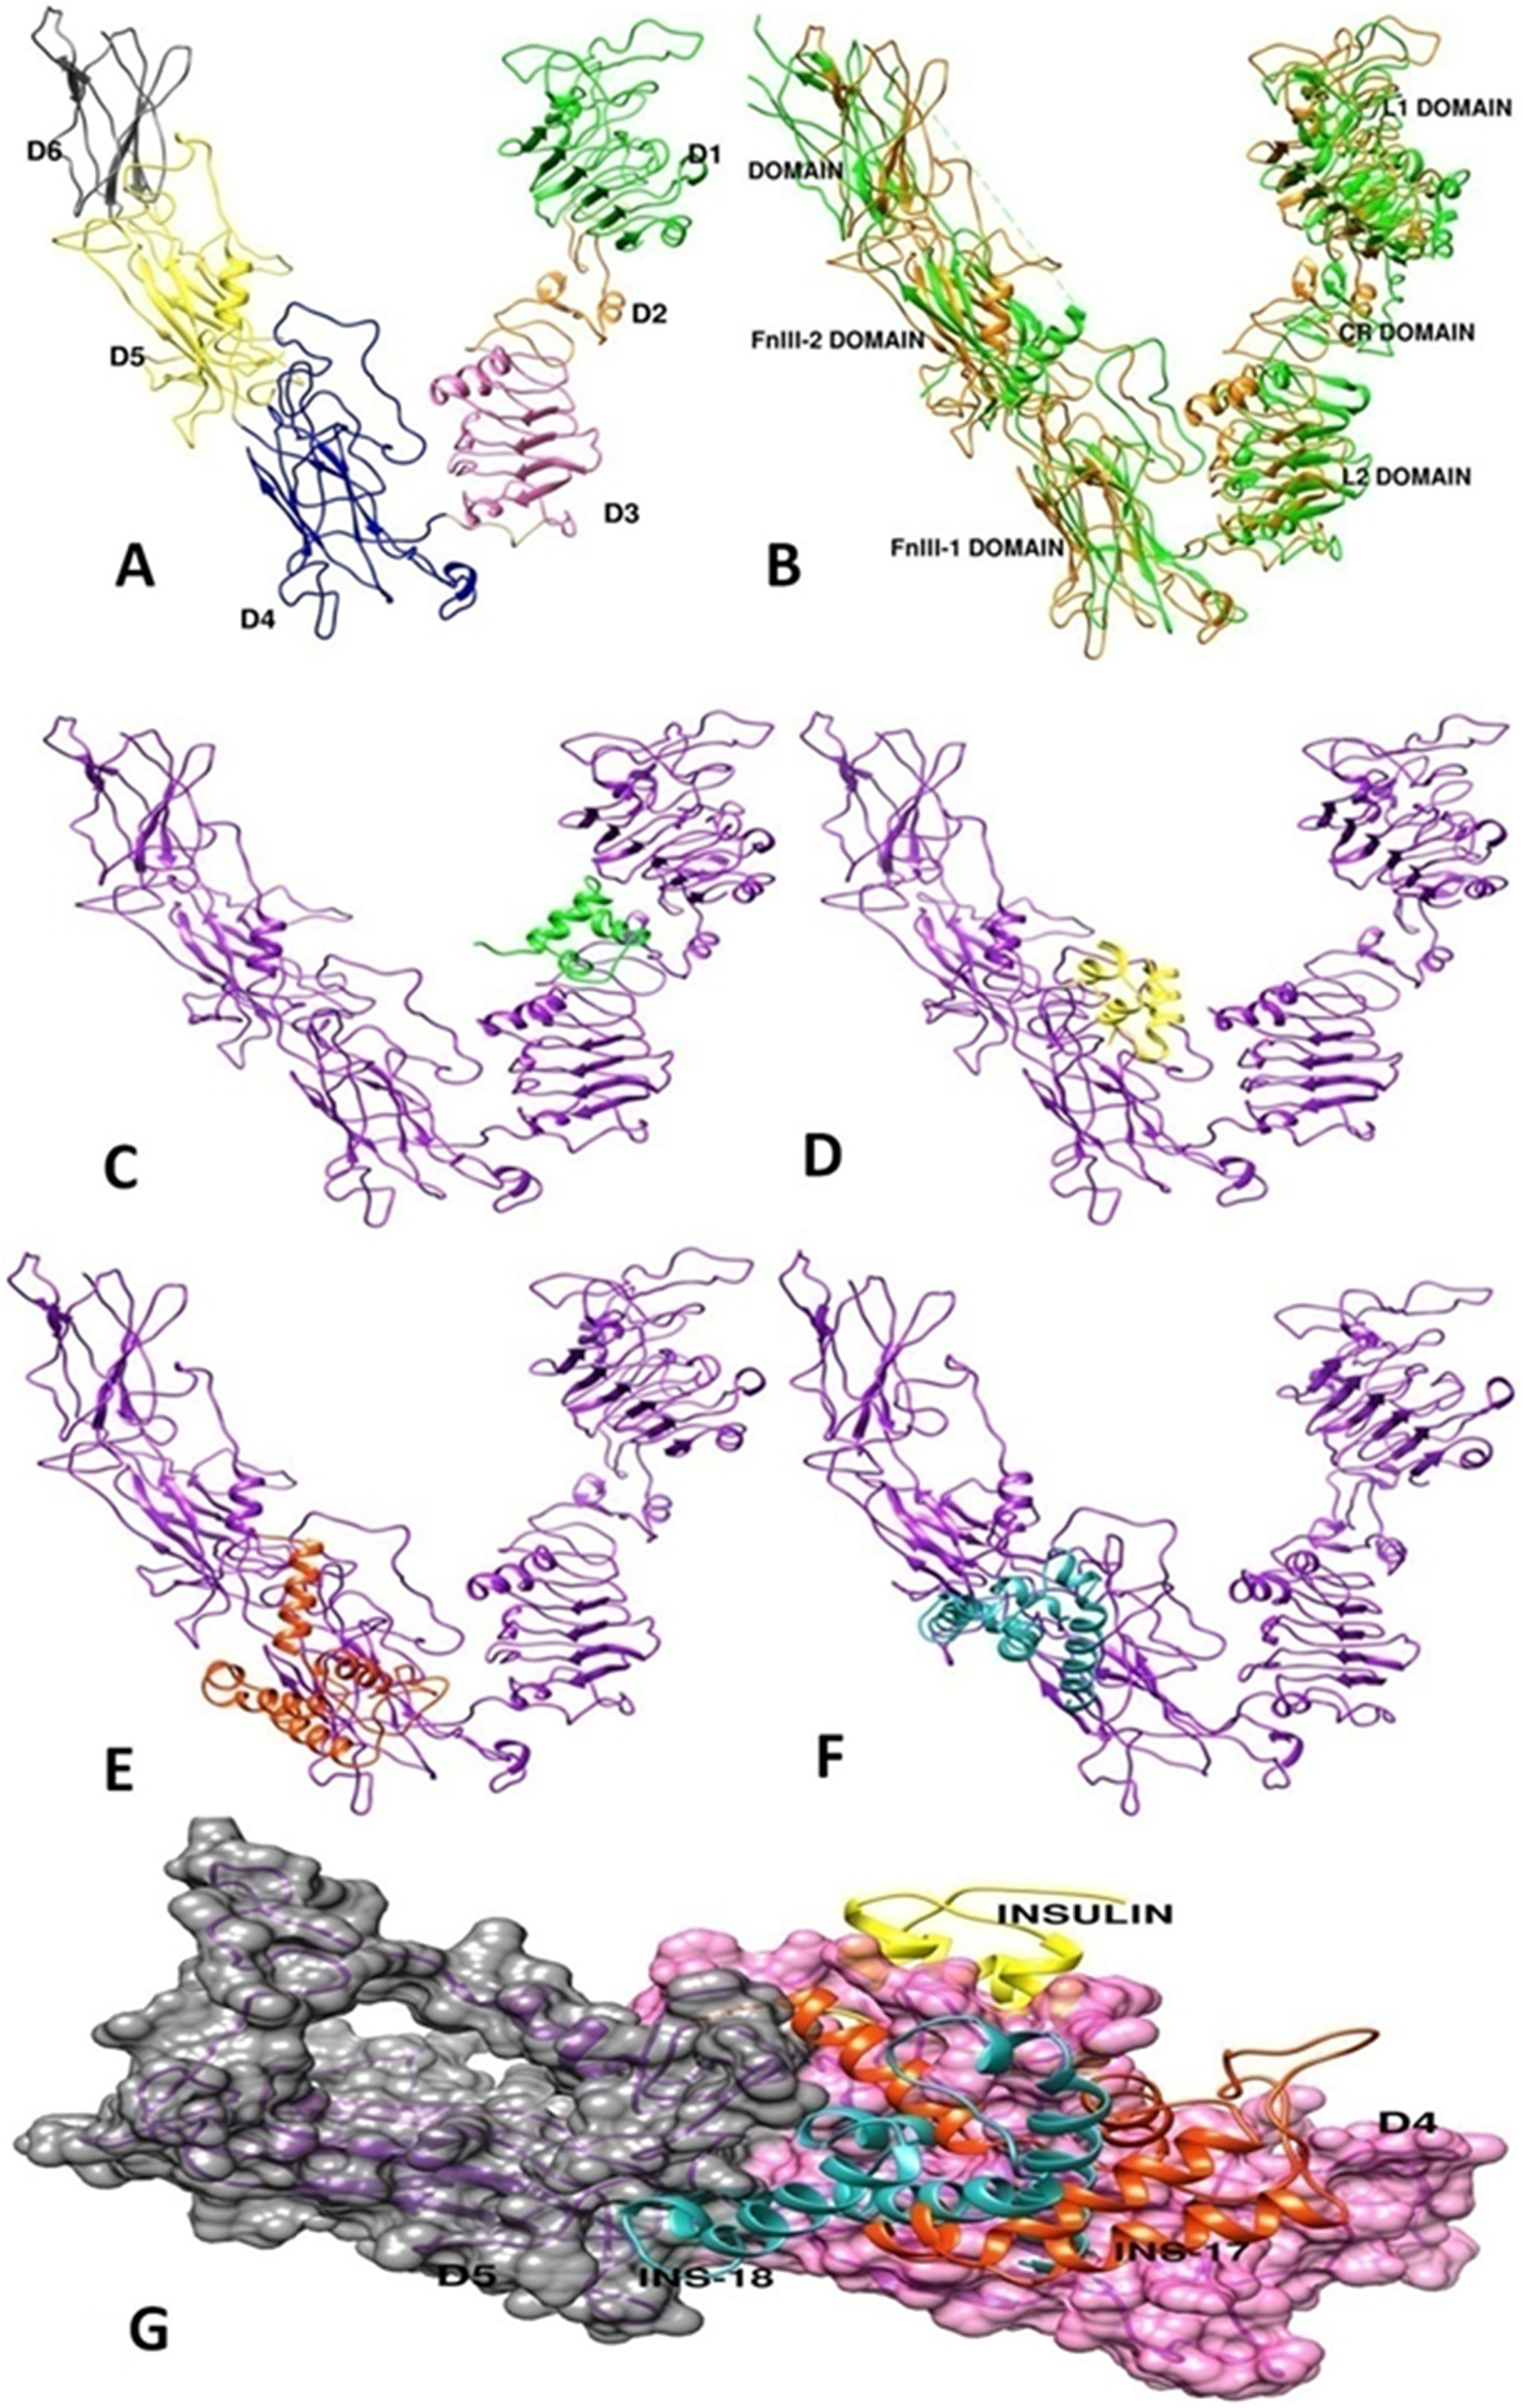 Three-dimensional structure construction of C. elegans DAF-2 insulin-receptor and molecular docking studies of agonist and anatagonist on modelled DAF-2 structure.